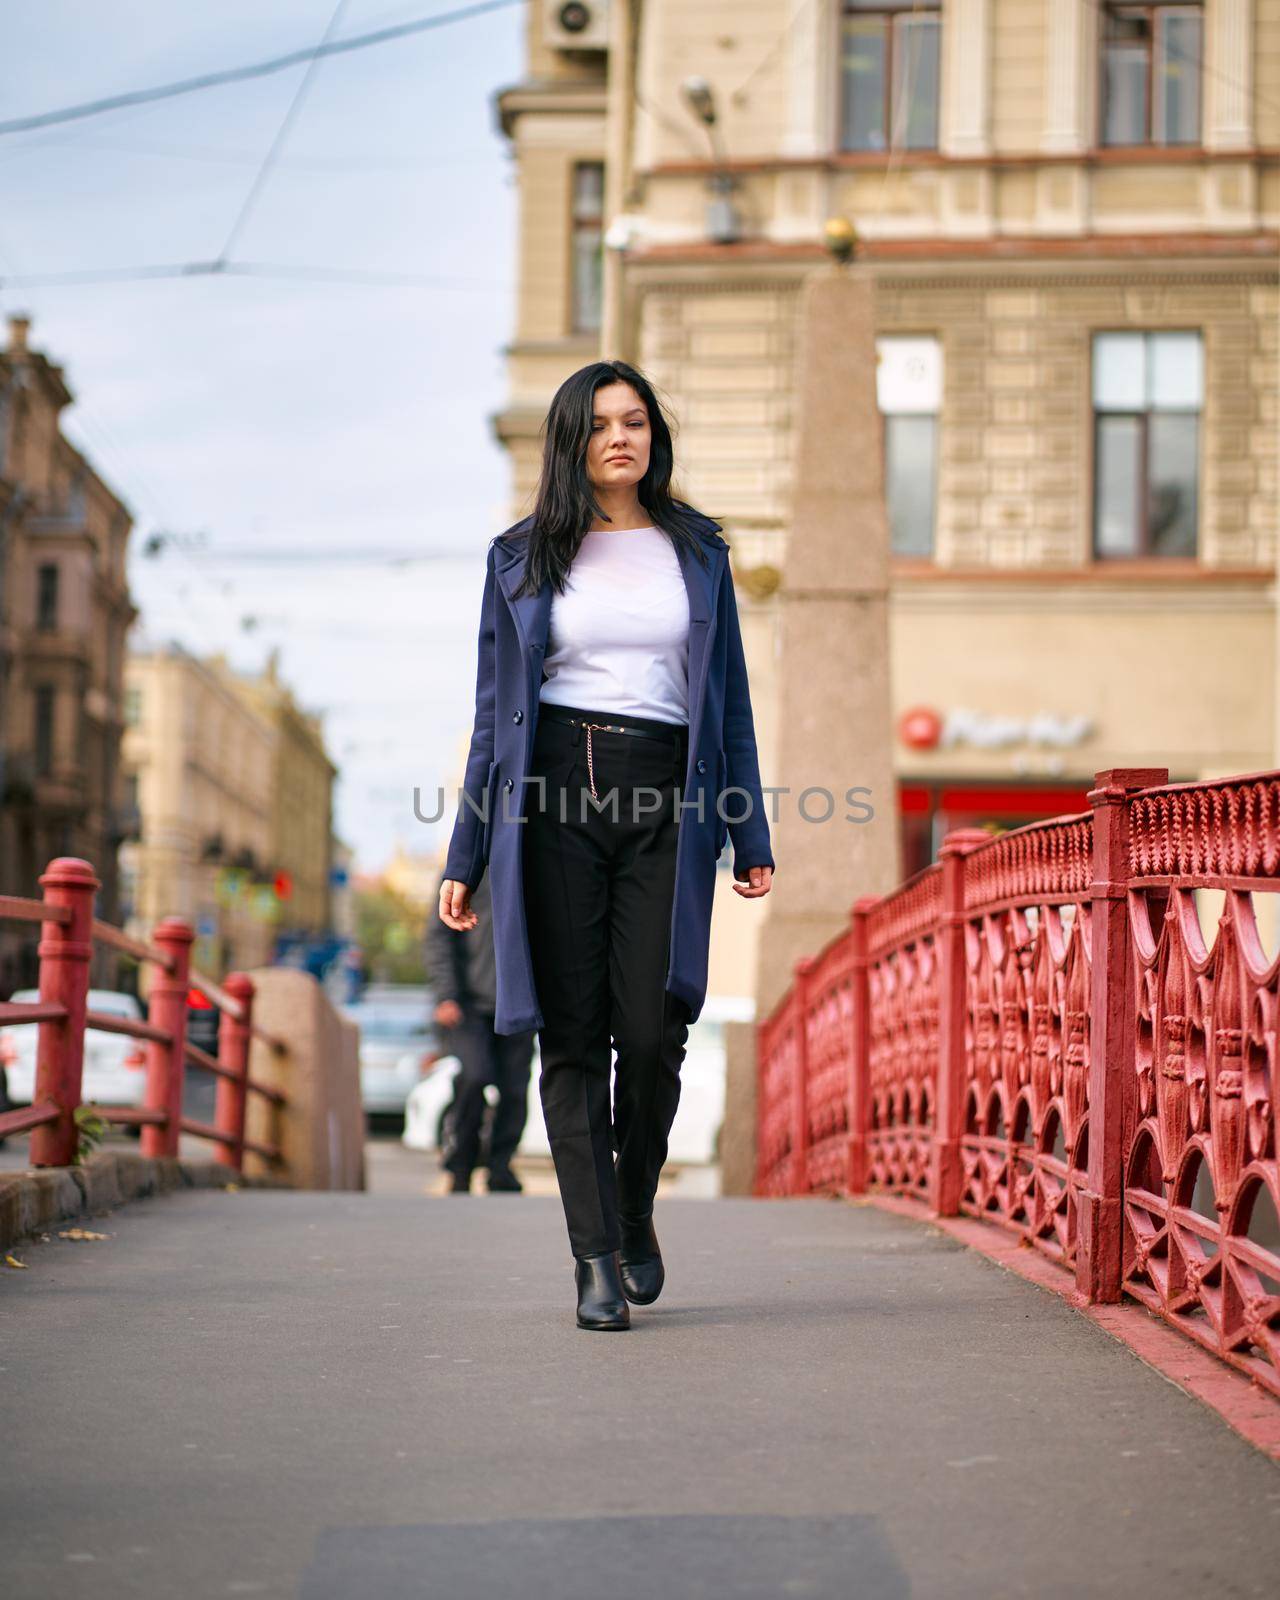 Charming thoughtful fashionably dressed woman with long dark hair travels through Europe, walking in the city center of St. Petersburg. A beautiful girl wanders alone through autumn streets by NataBene